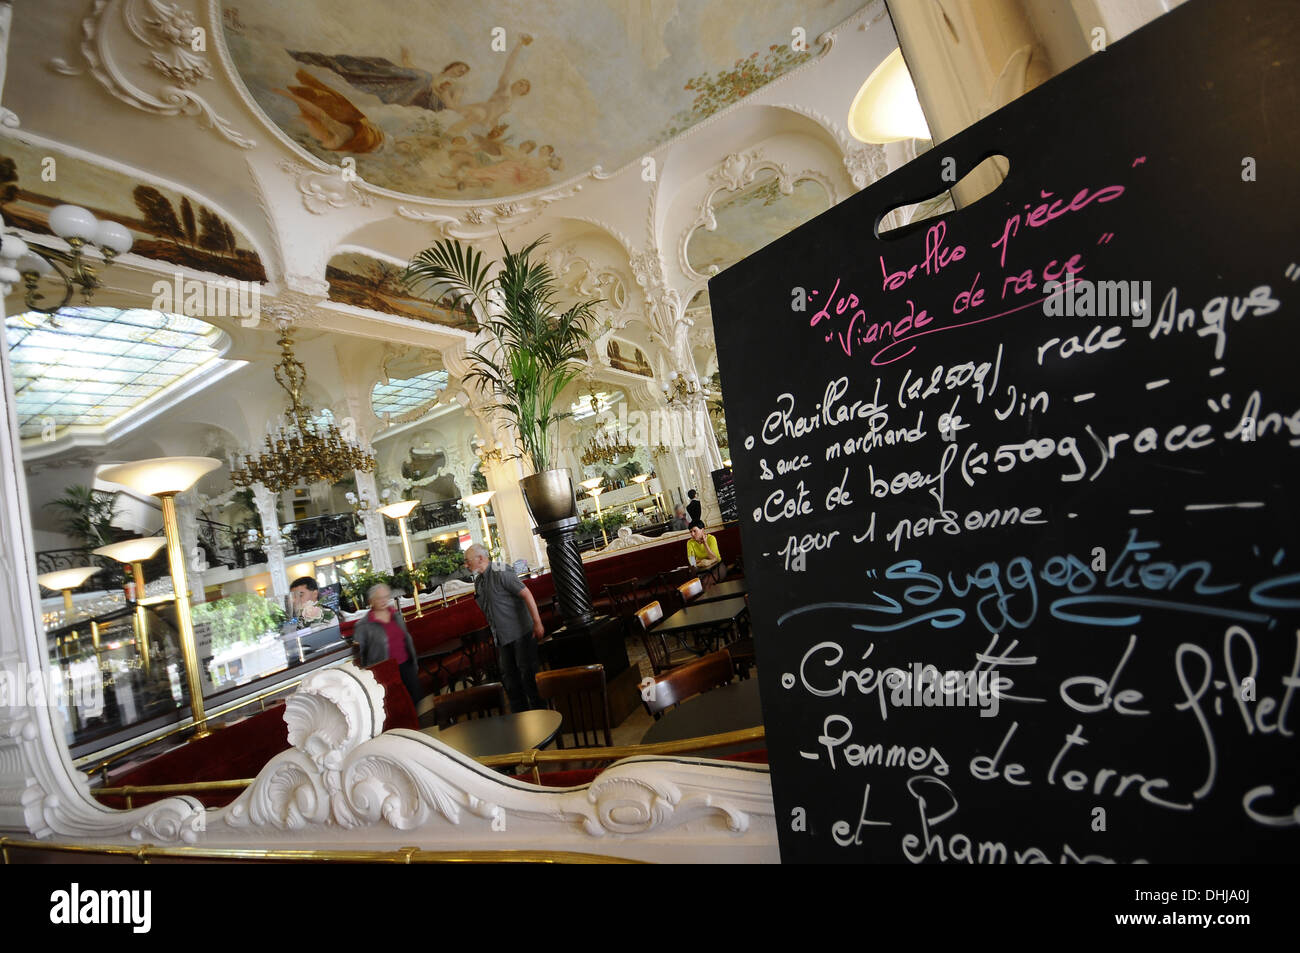 Interior view of the Grand Cafe at Moulins, Bourbonnais, Auvergne, France, Europe Stock Photo